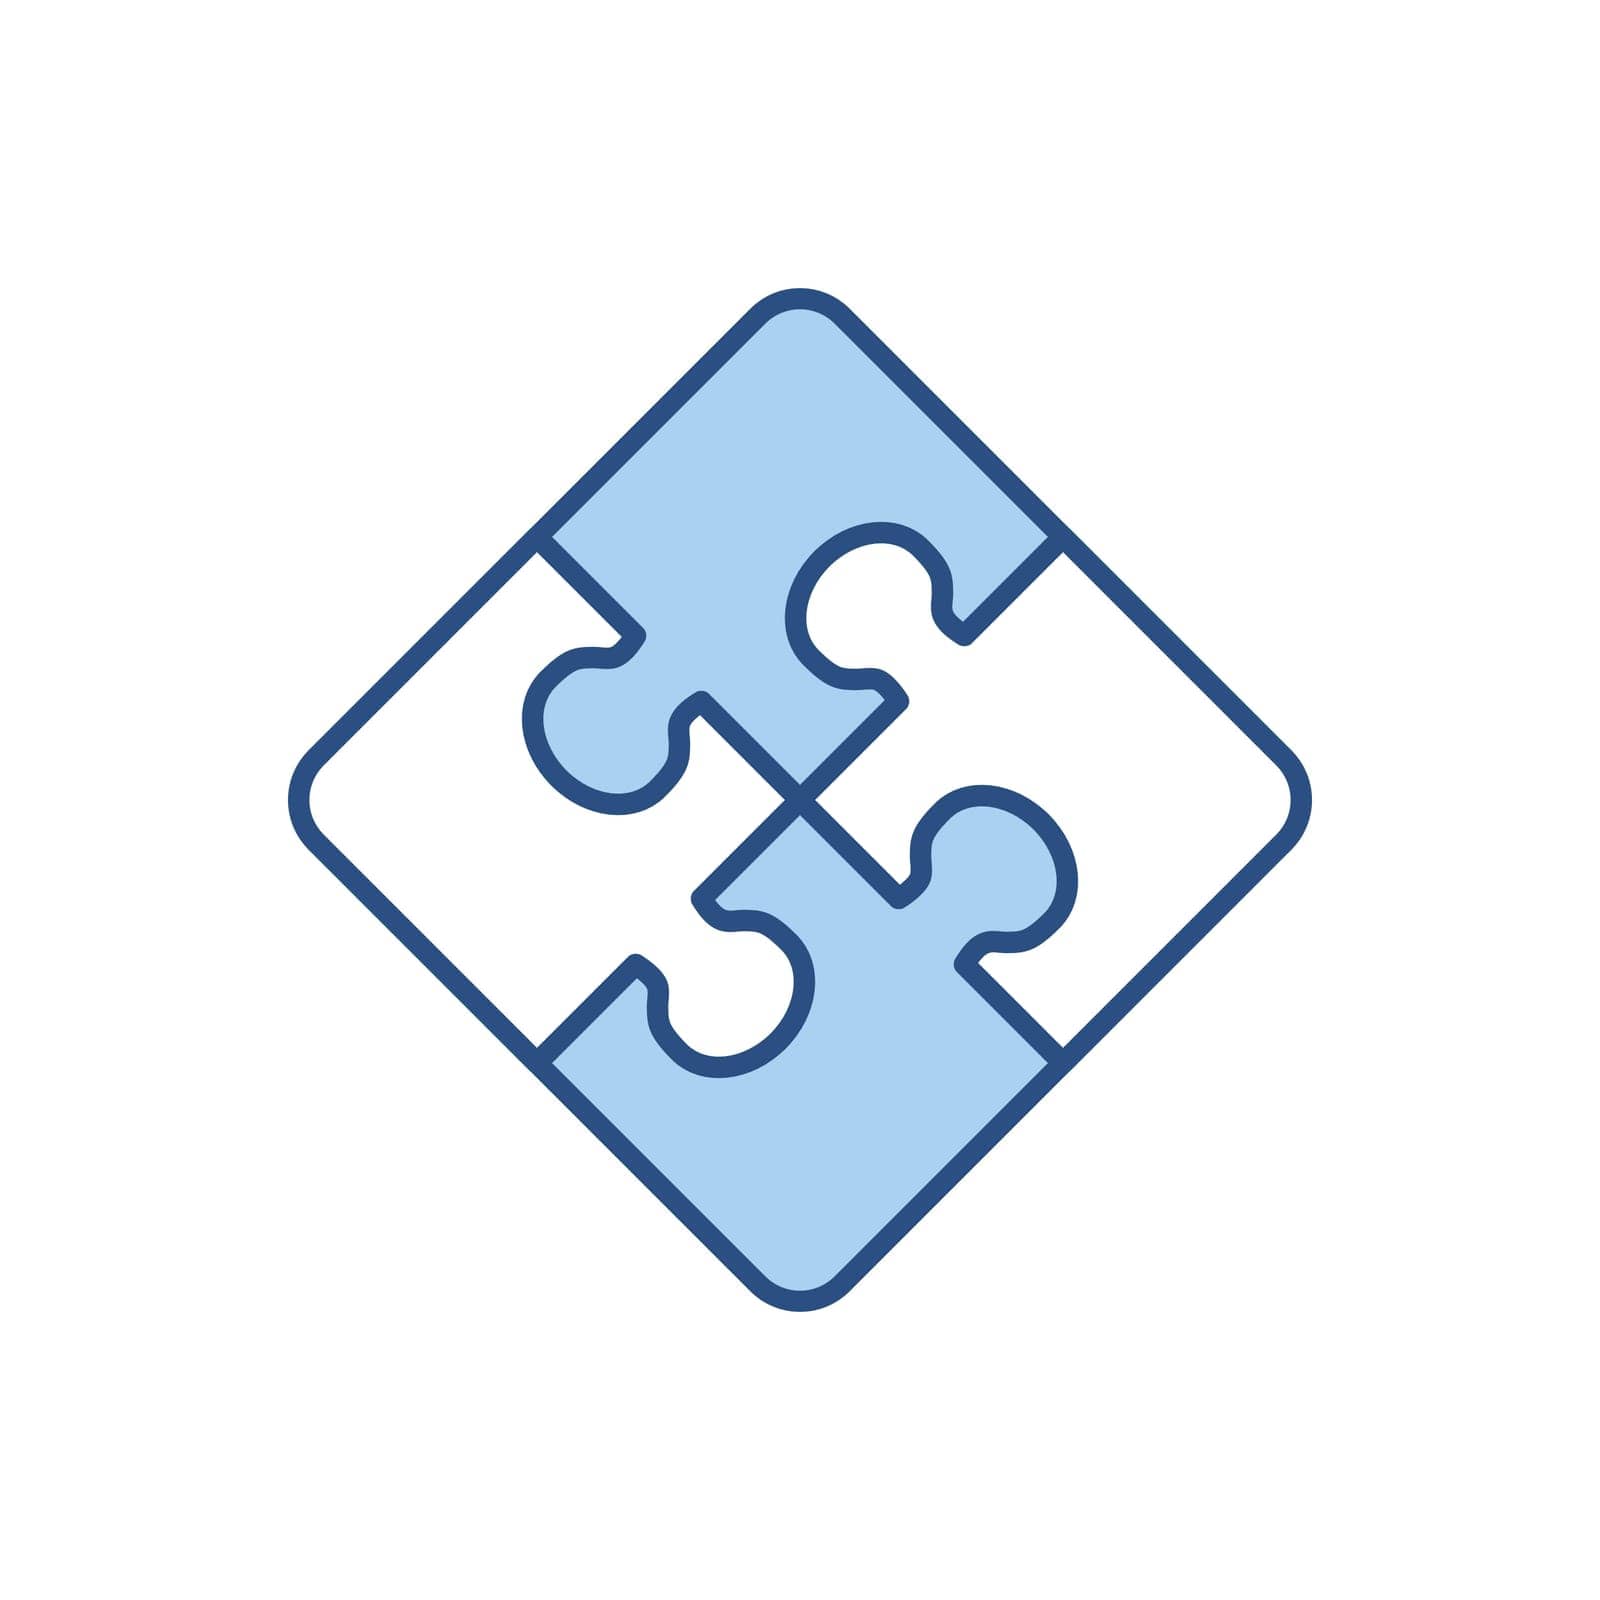 Puzzle related vector icon by smoki